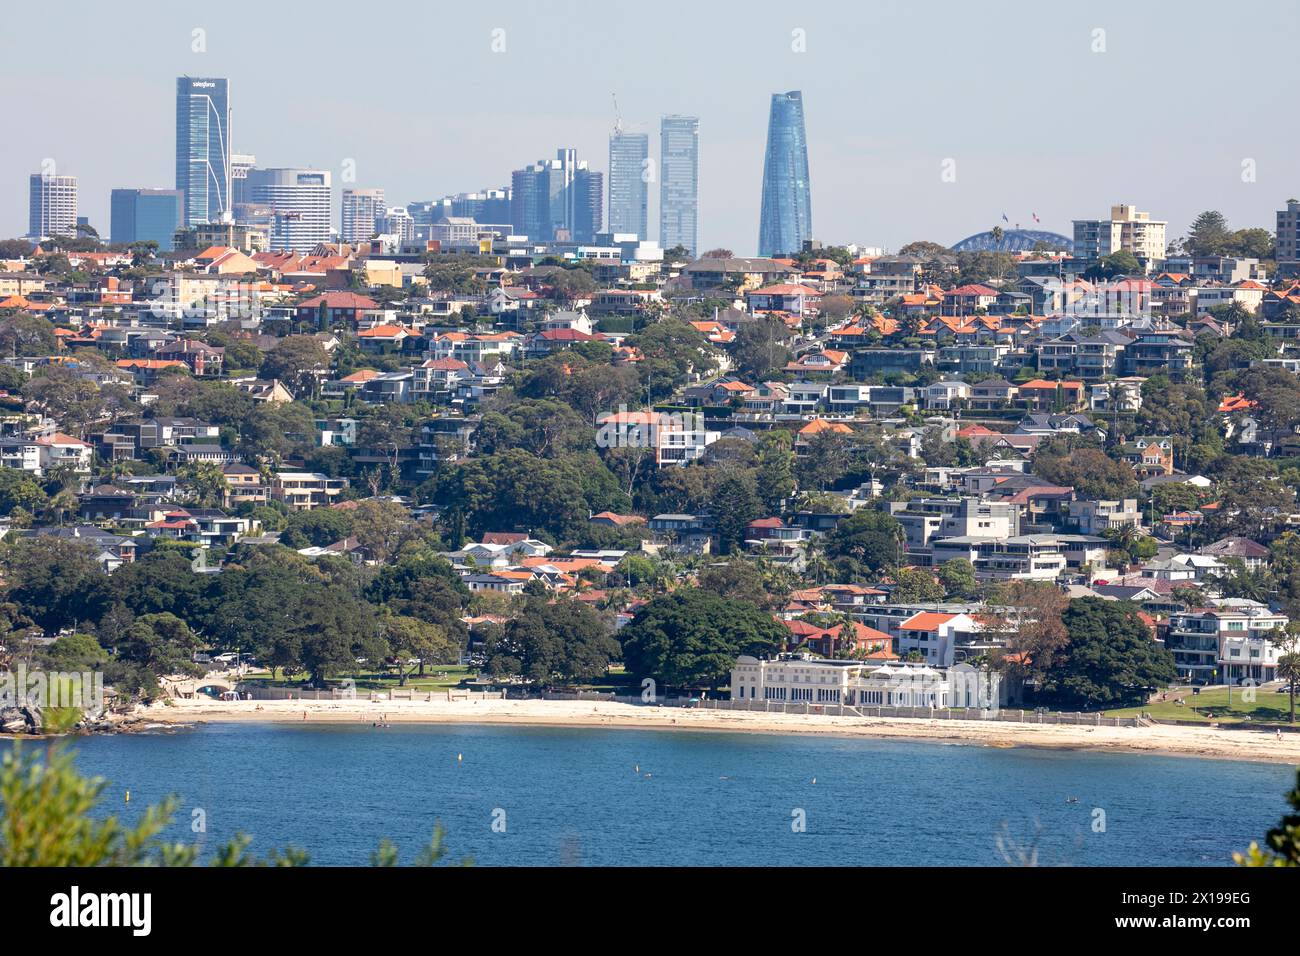 Bathers Pavilion on Balmoral Edwards Beach with suburb housing homes and view of Sydney skyscrapers in the city centre, NSW,Australia Stock Photo